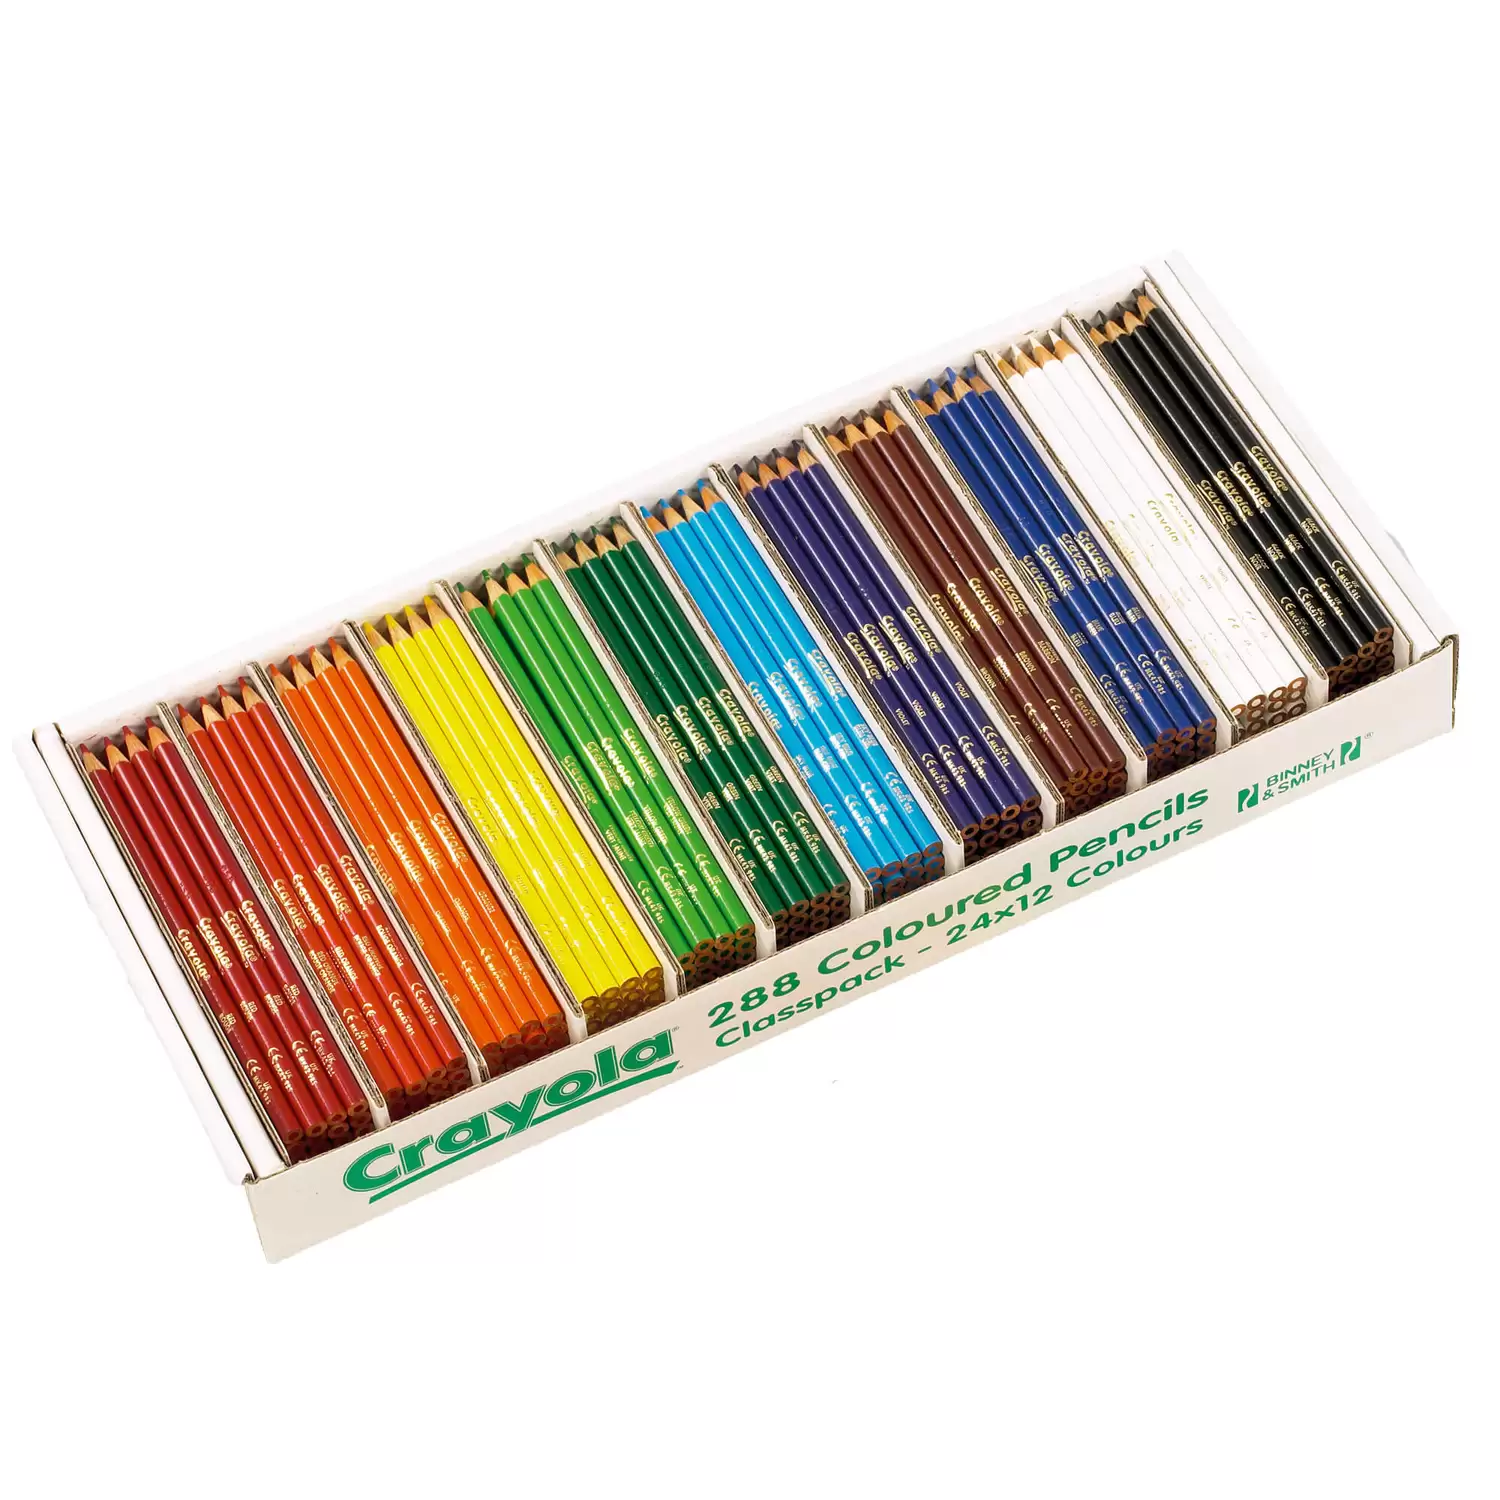 https://www.gompels.co.uk/image/cache/data/12182-crayola-colouring-pencils-assorted-classpack-288-1500x1500.webp